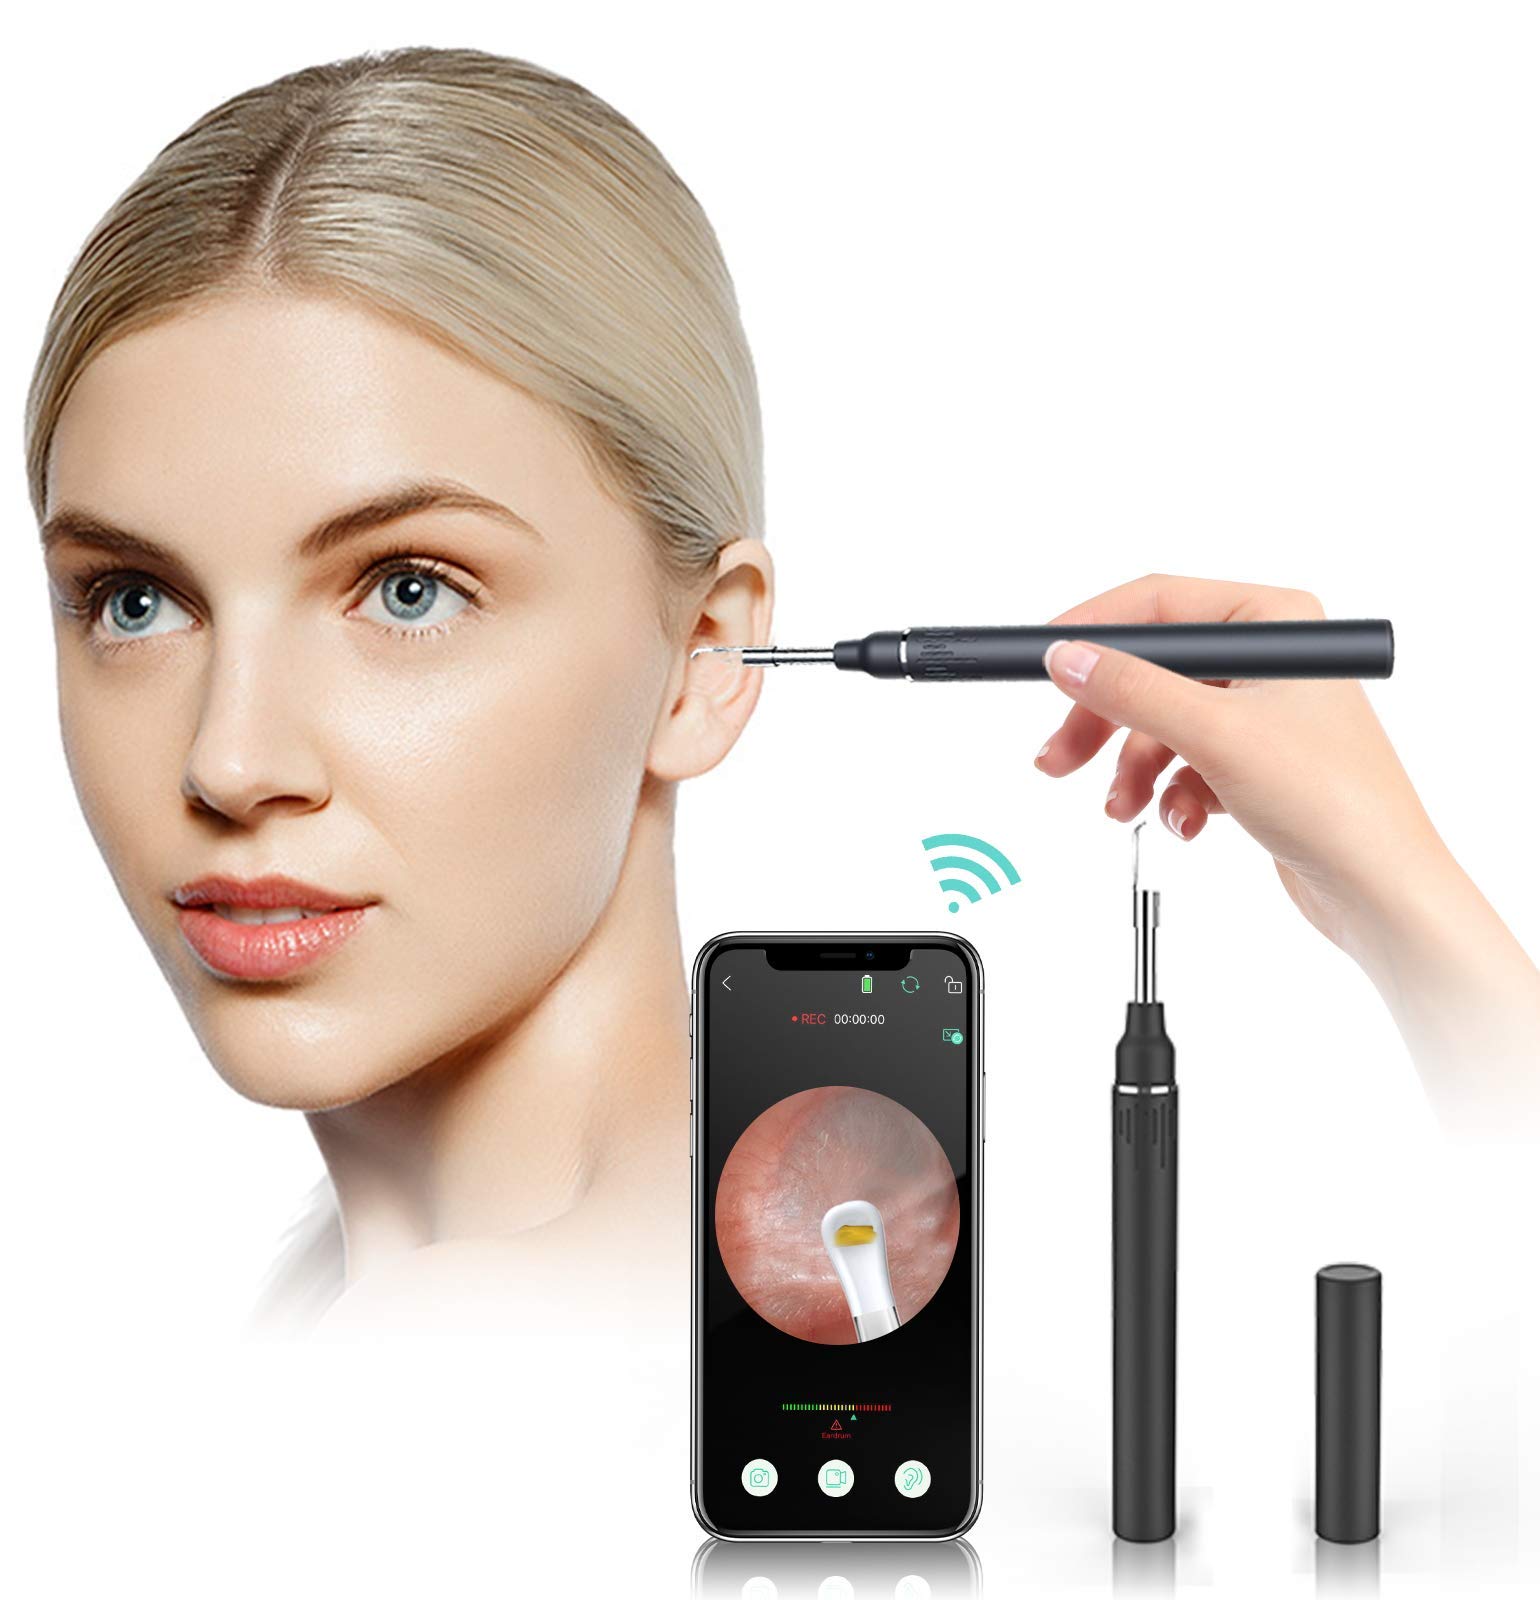 Ear Wax Removal Kit - Ear Cleaner Camera, 3.9 mm Otoscope with Light, Ear Cleaning Kit, Ear Wax Removal Tool Compatible with Android and iPhone